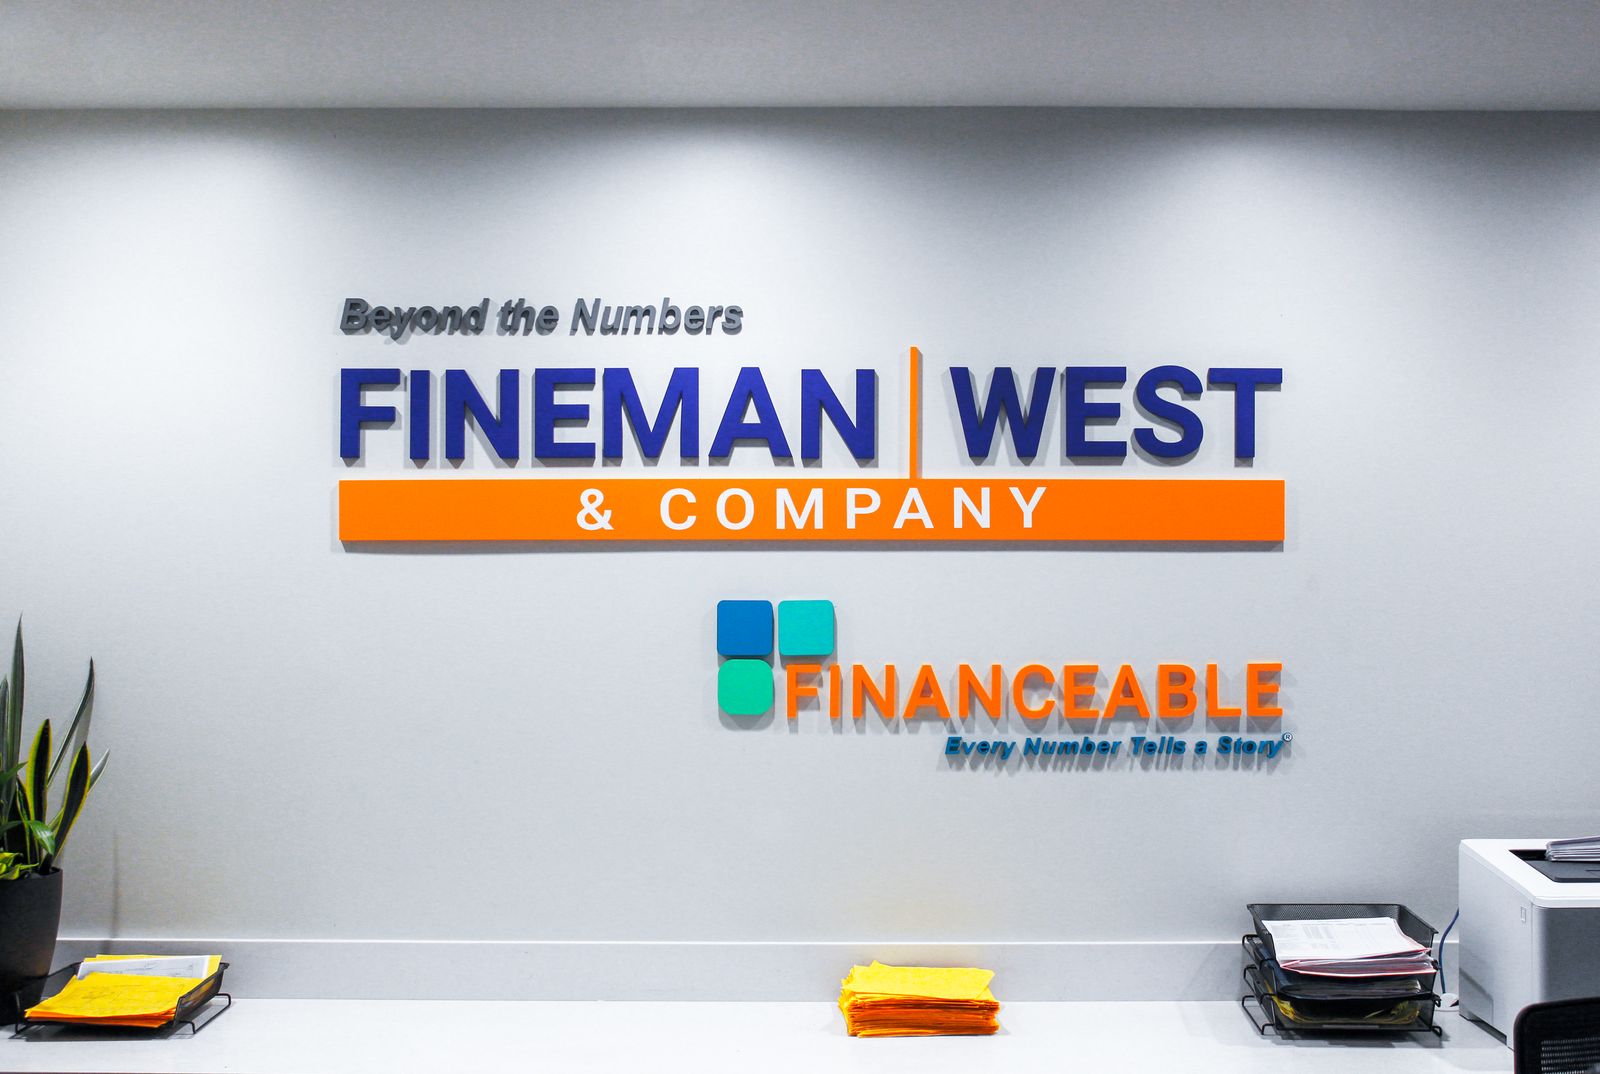 Fineman West & Company office lobby sign made of acrylic for interior branding